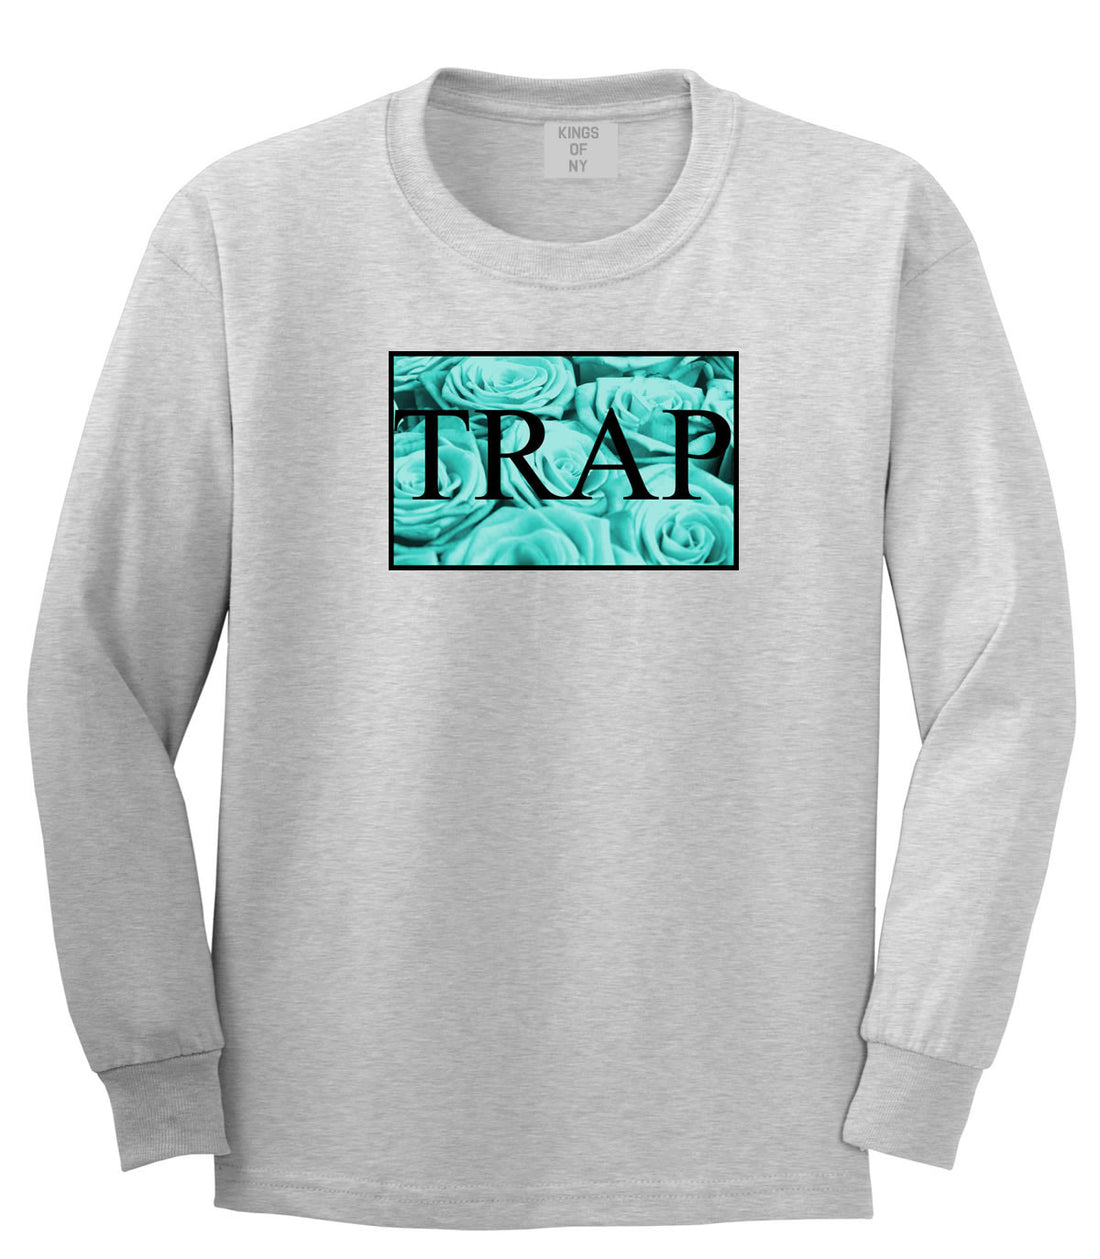 Trap Floral Style Hood Music Hood Dope Long Sleeve Boys Kids T-Shirt In Grey by Kings Of NY